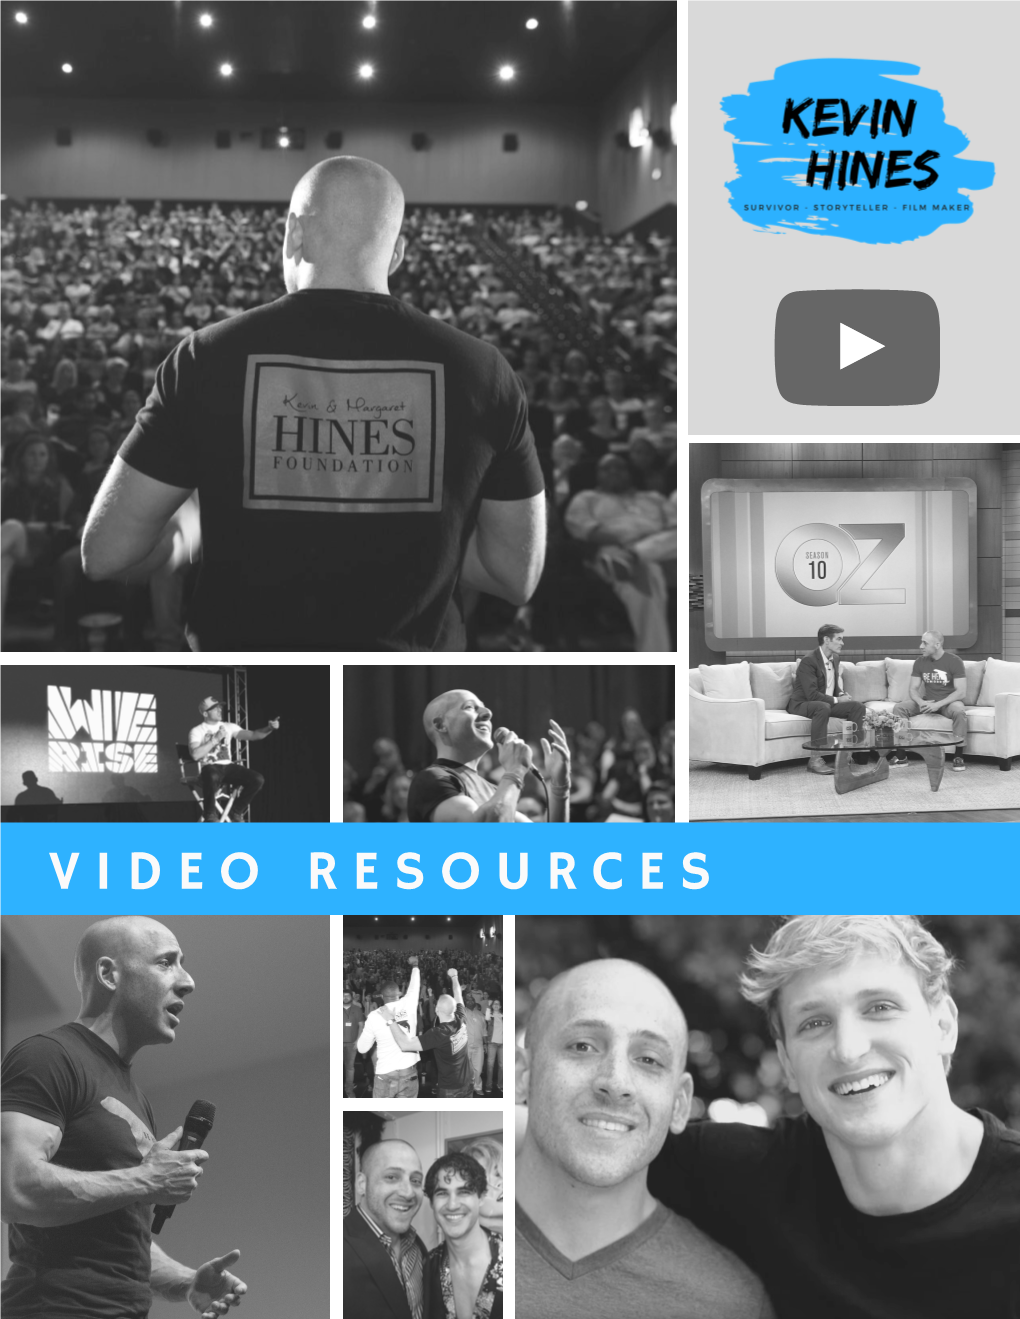 Kevin Hines Video Resource Guide for Schools, Orgs and Companies